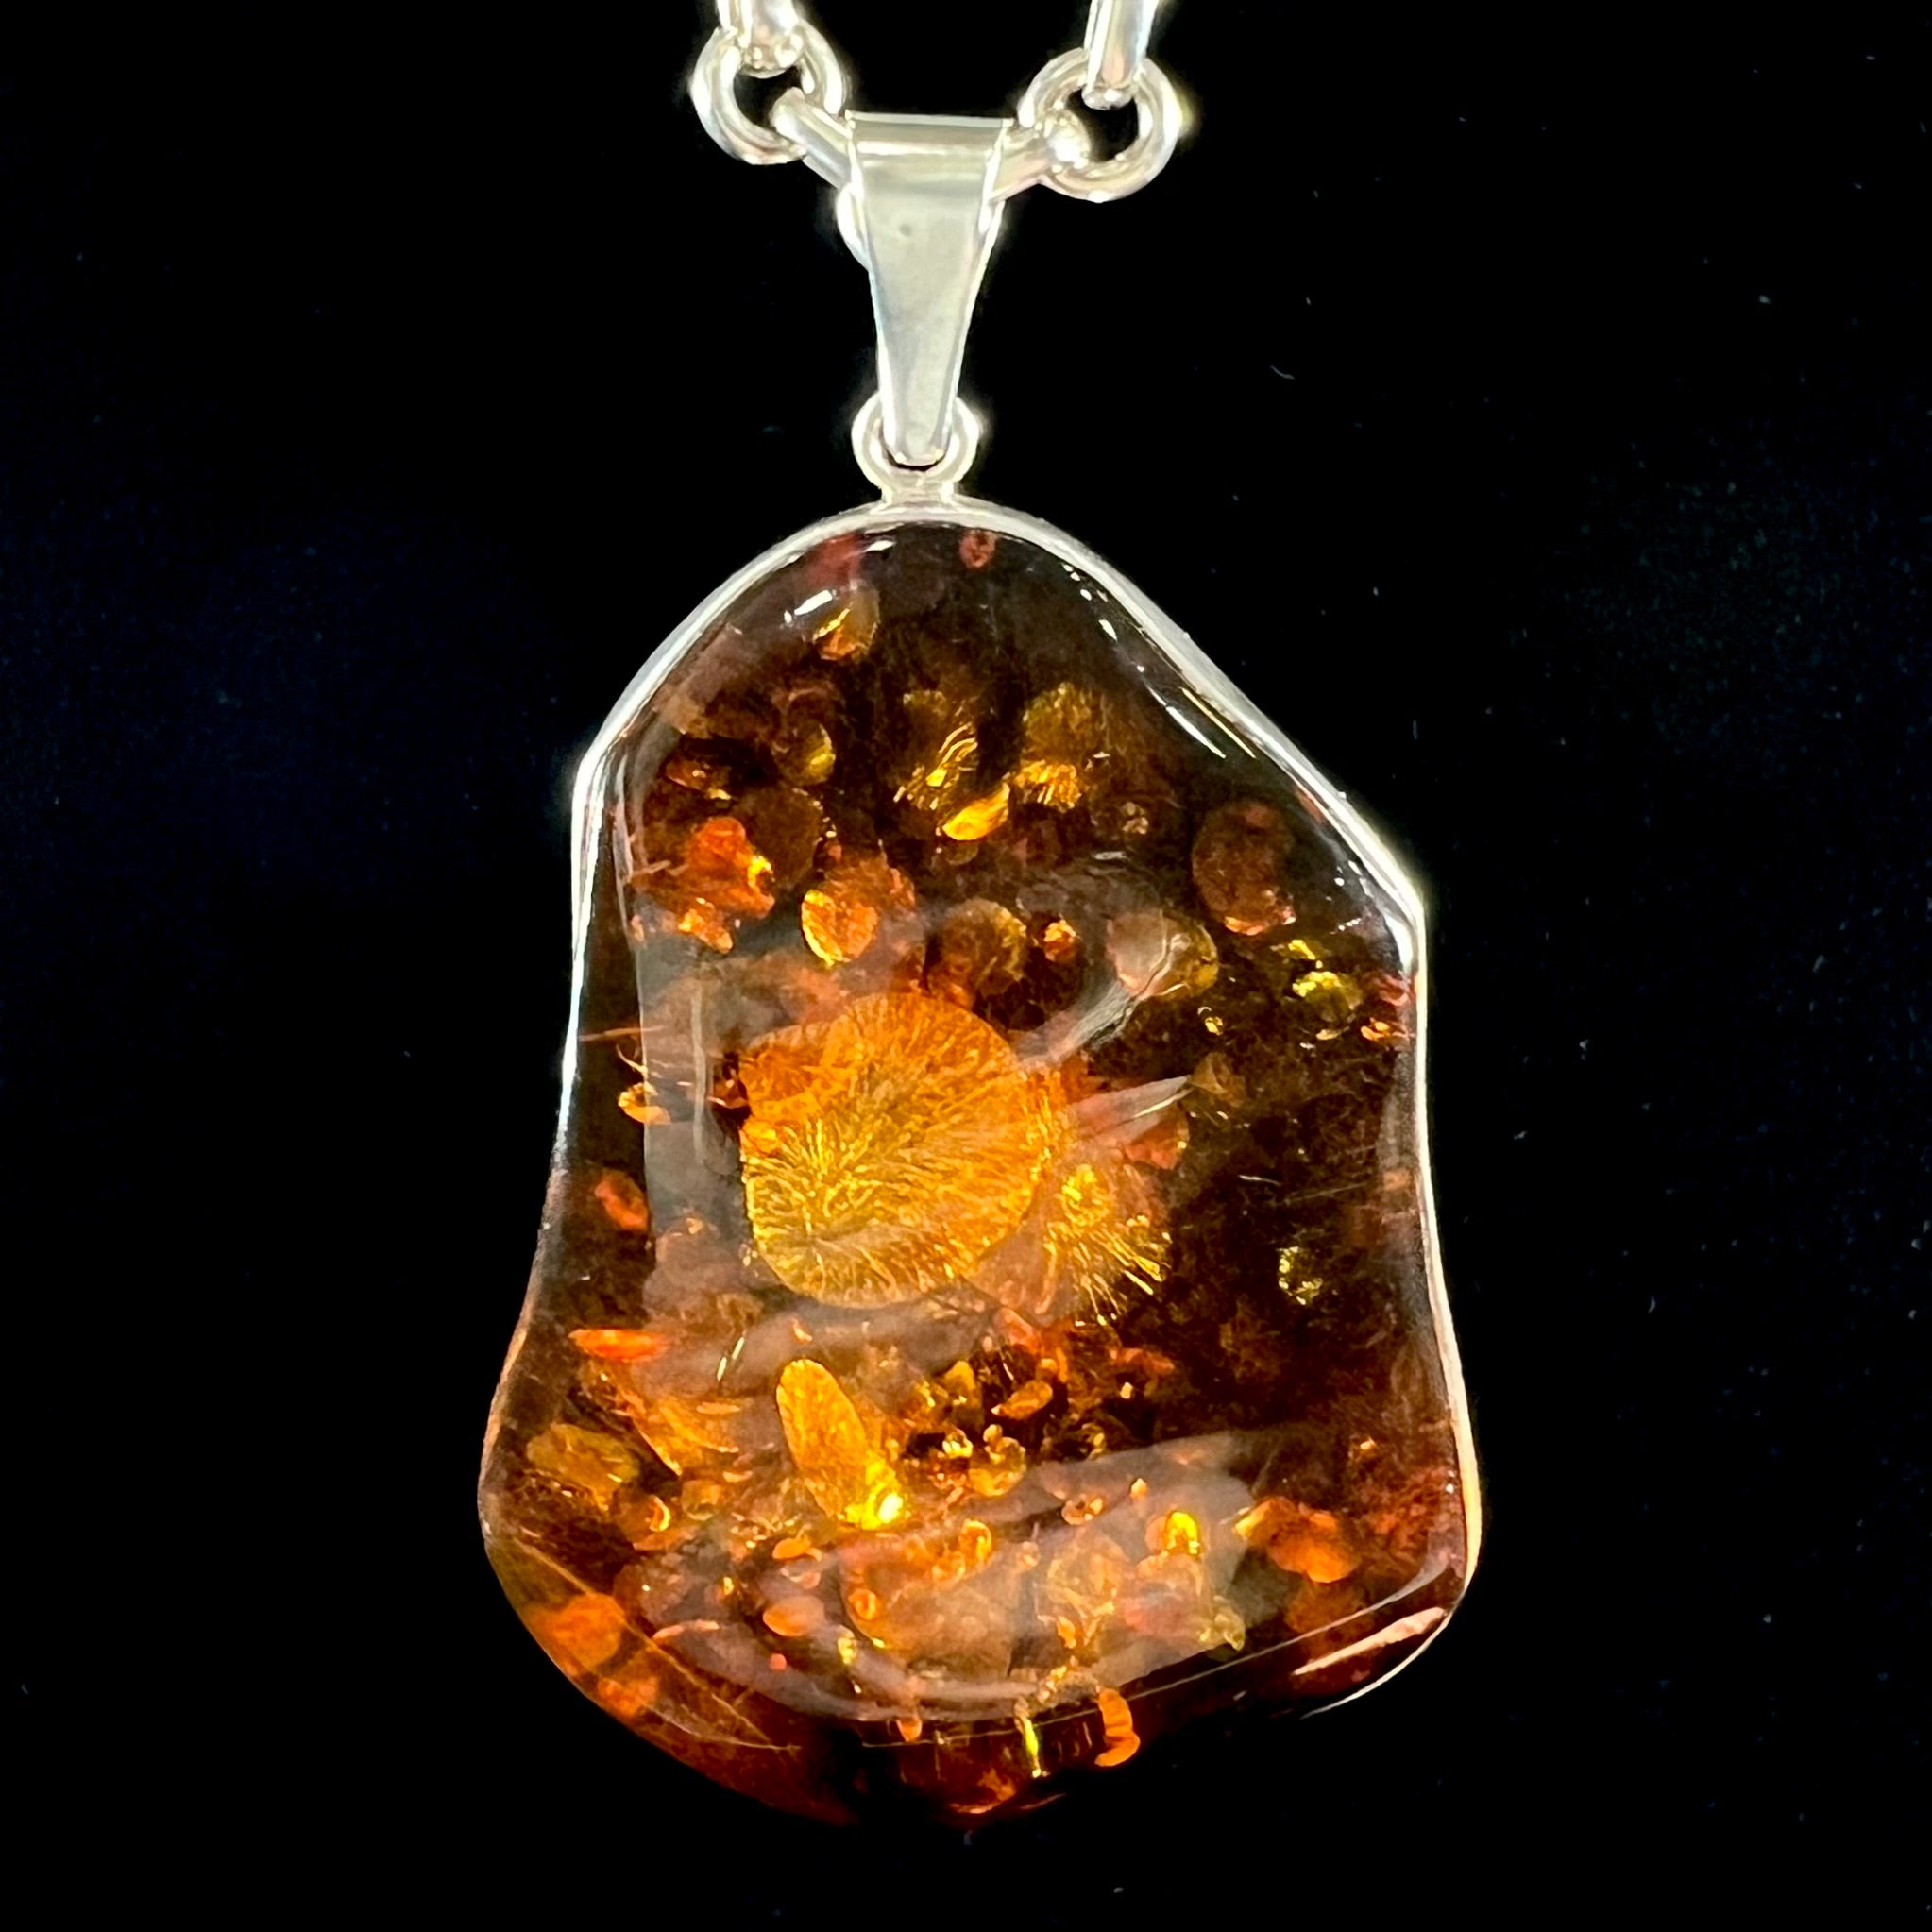 Large Amber Pendants Made of Natural Baltic Amber.